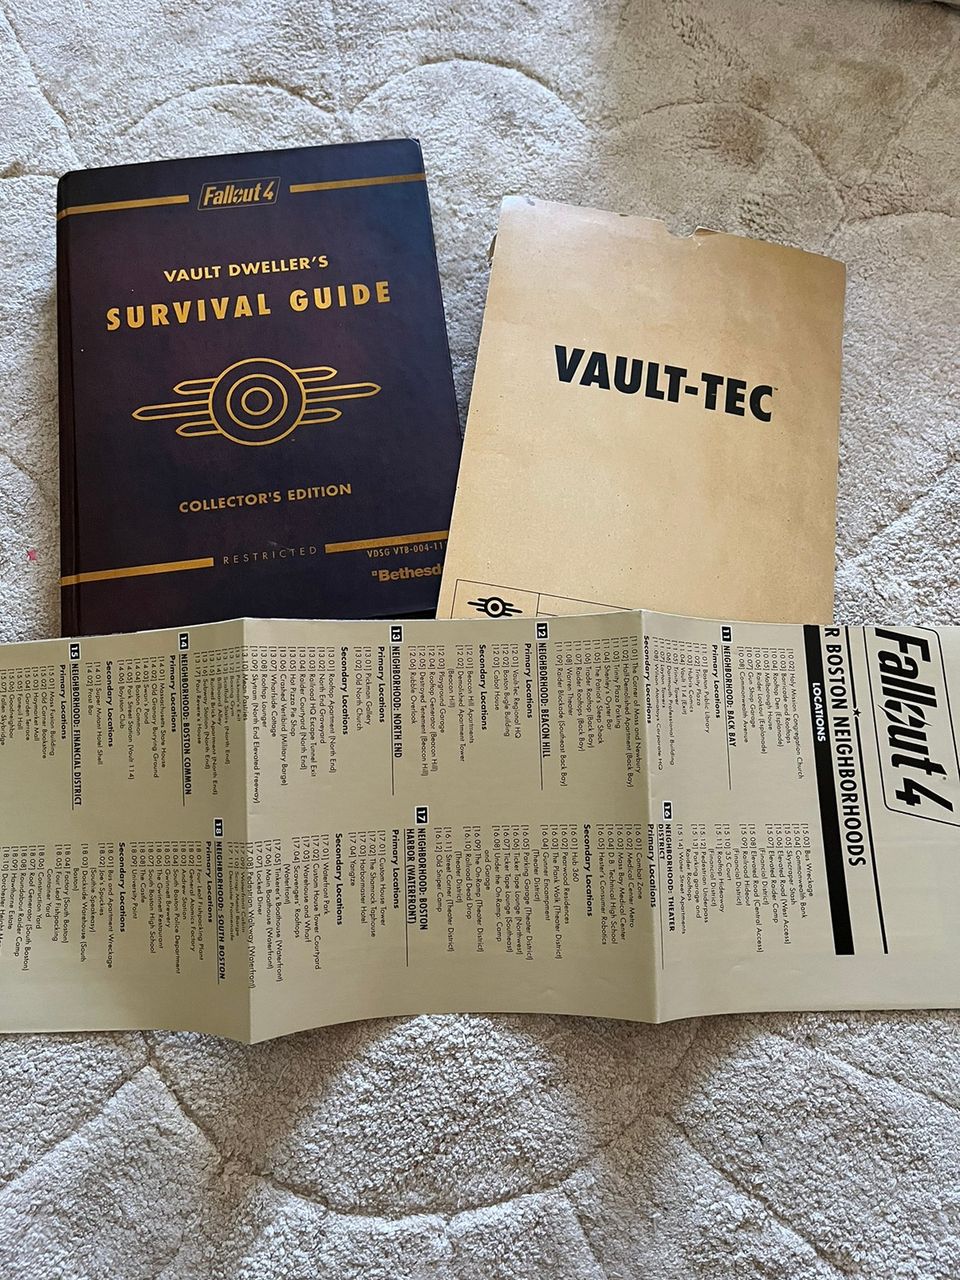 Limited edition Fallout 4 survival guide